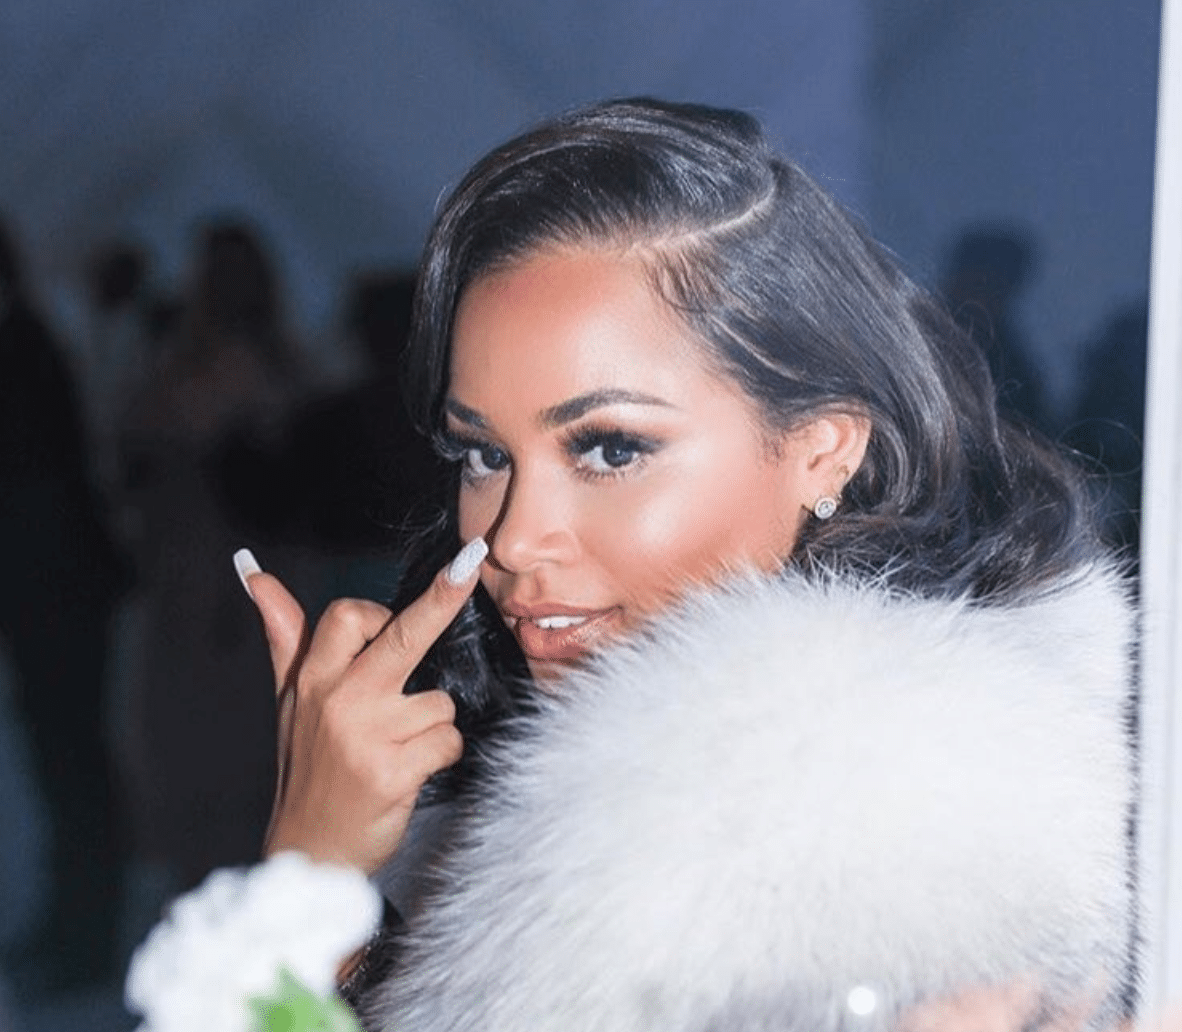 15 Times Lauren London And Those Dimples Made Us Melt